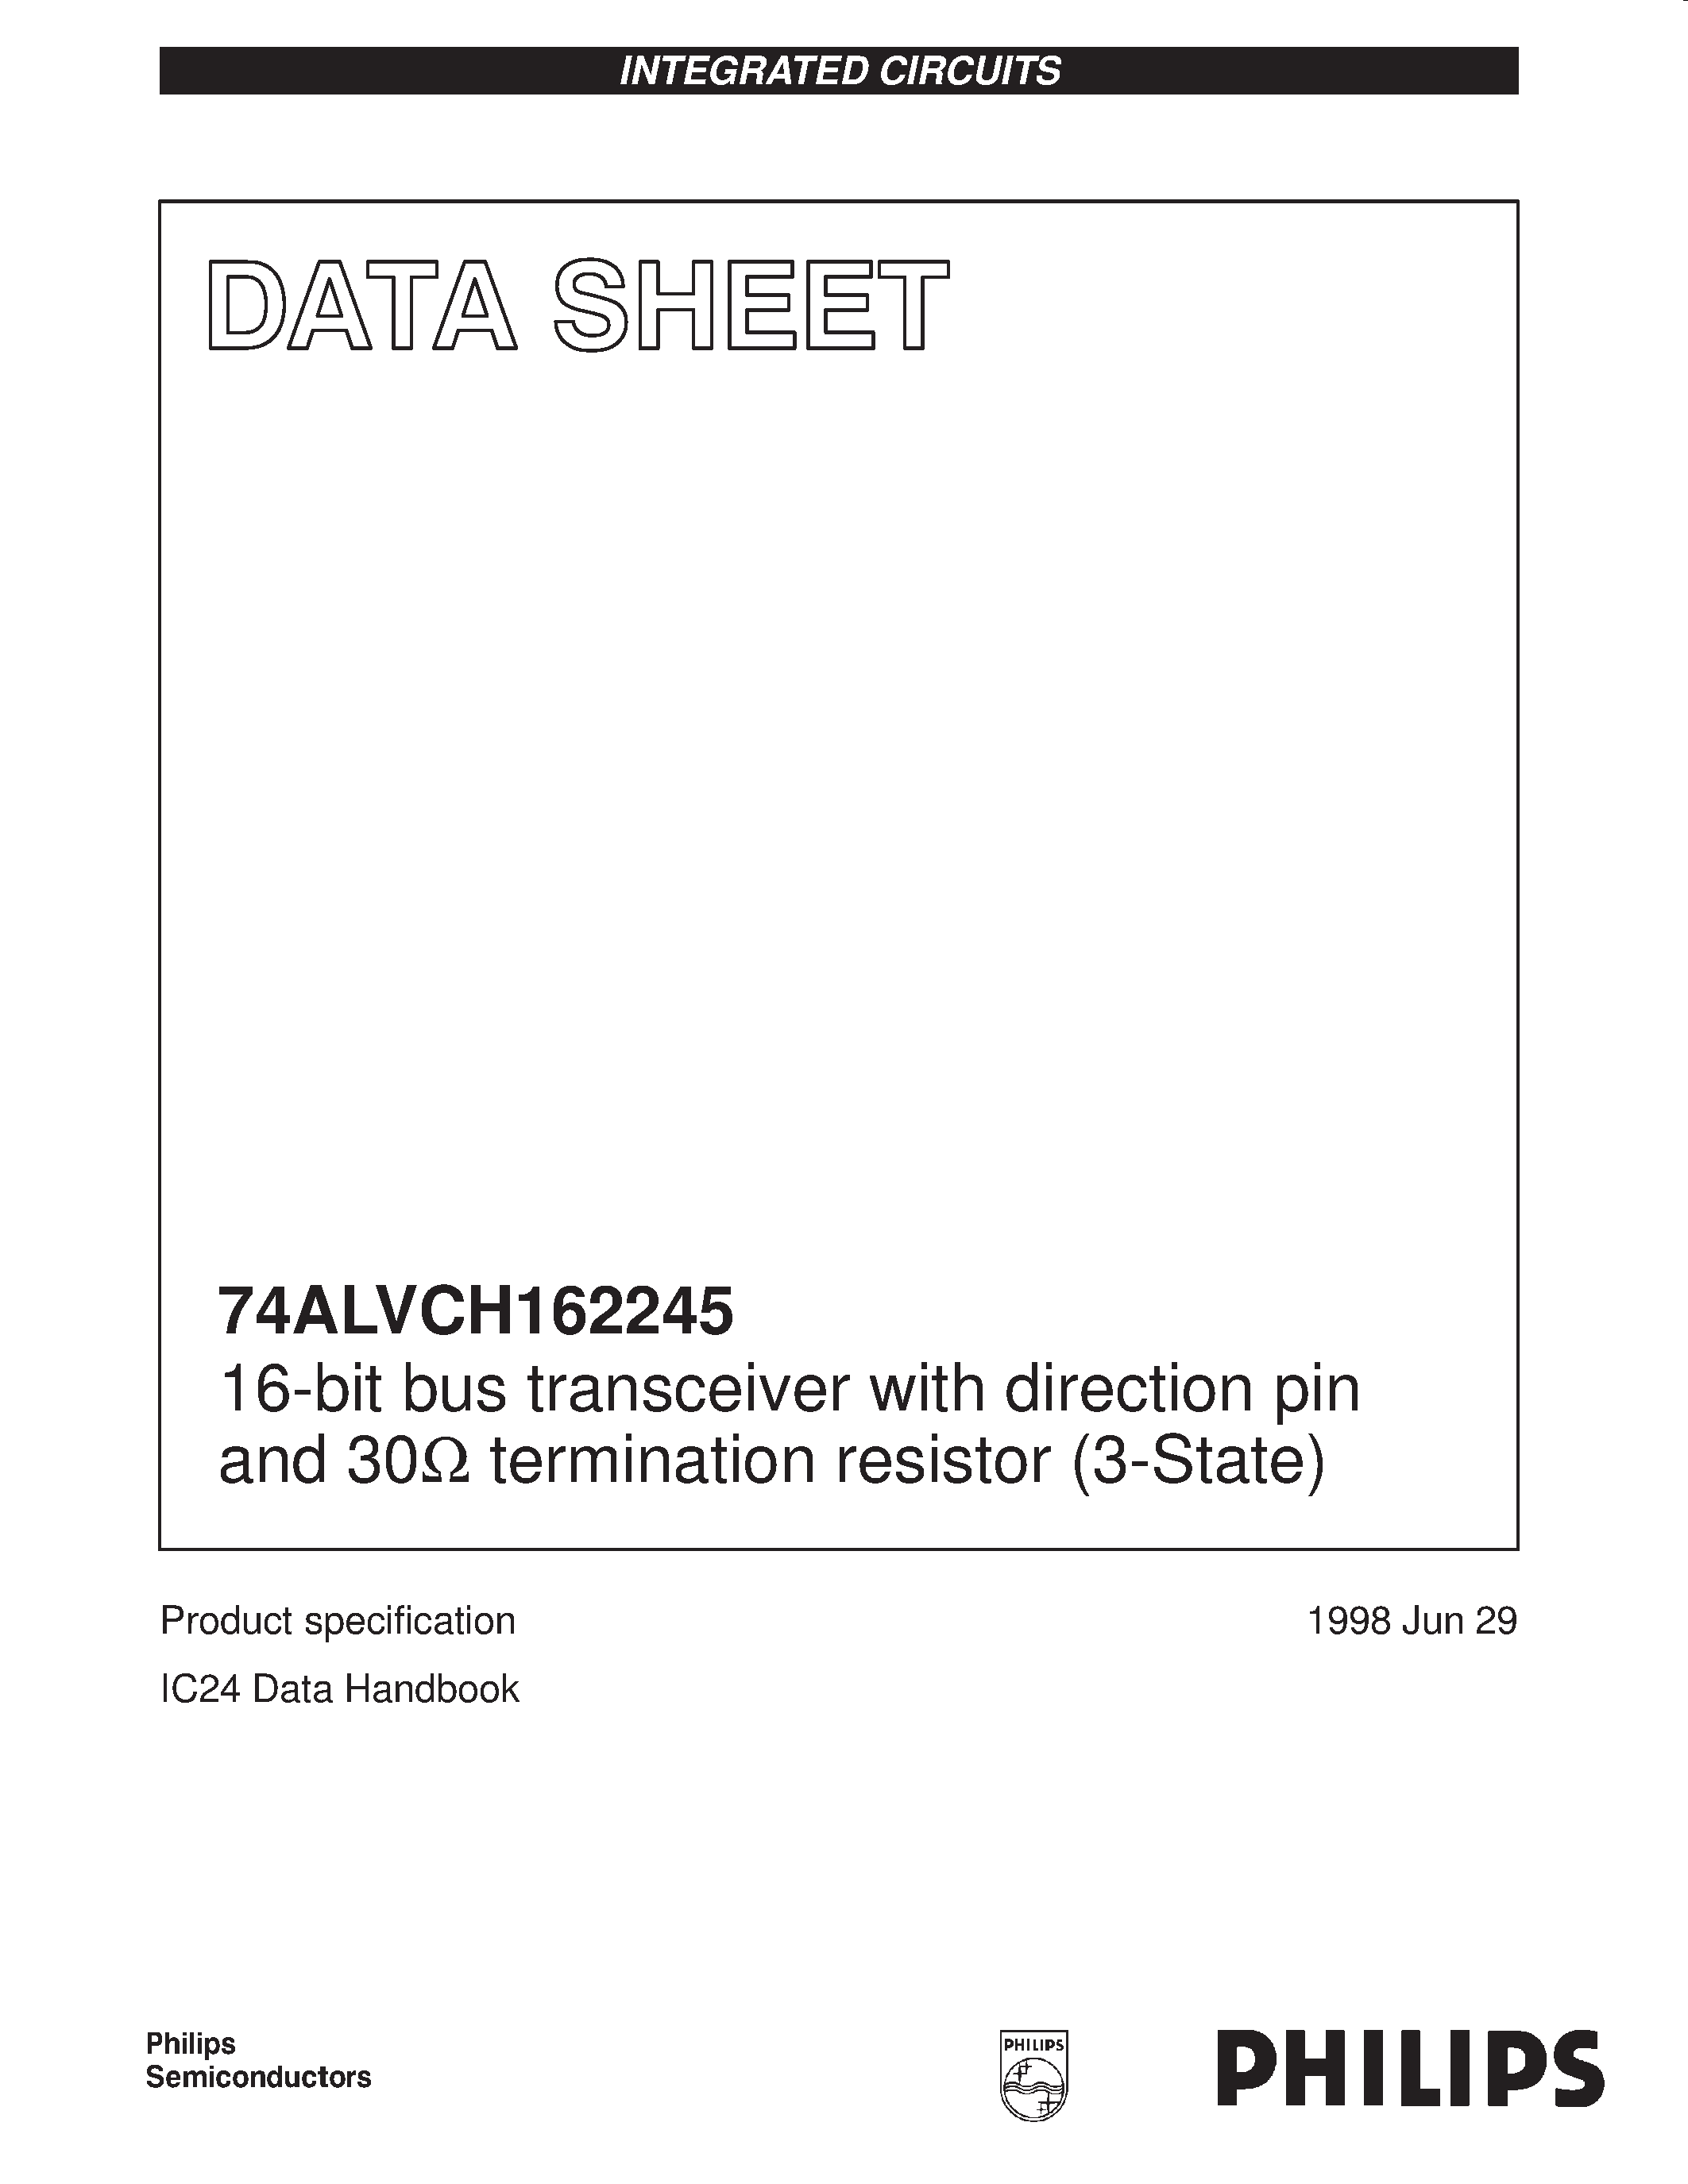 Datasheet 74ALVCH162245DGG - 16-bit bus transceiver with direction pin and 30ohm termination resistor 3-State page 1